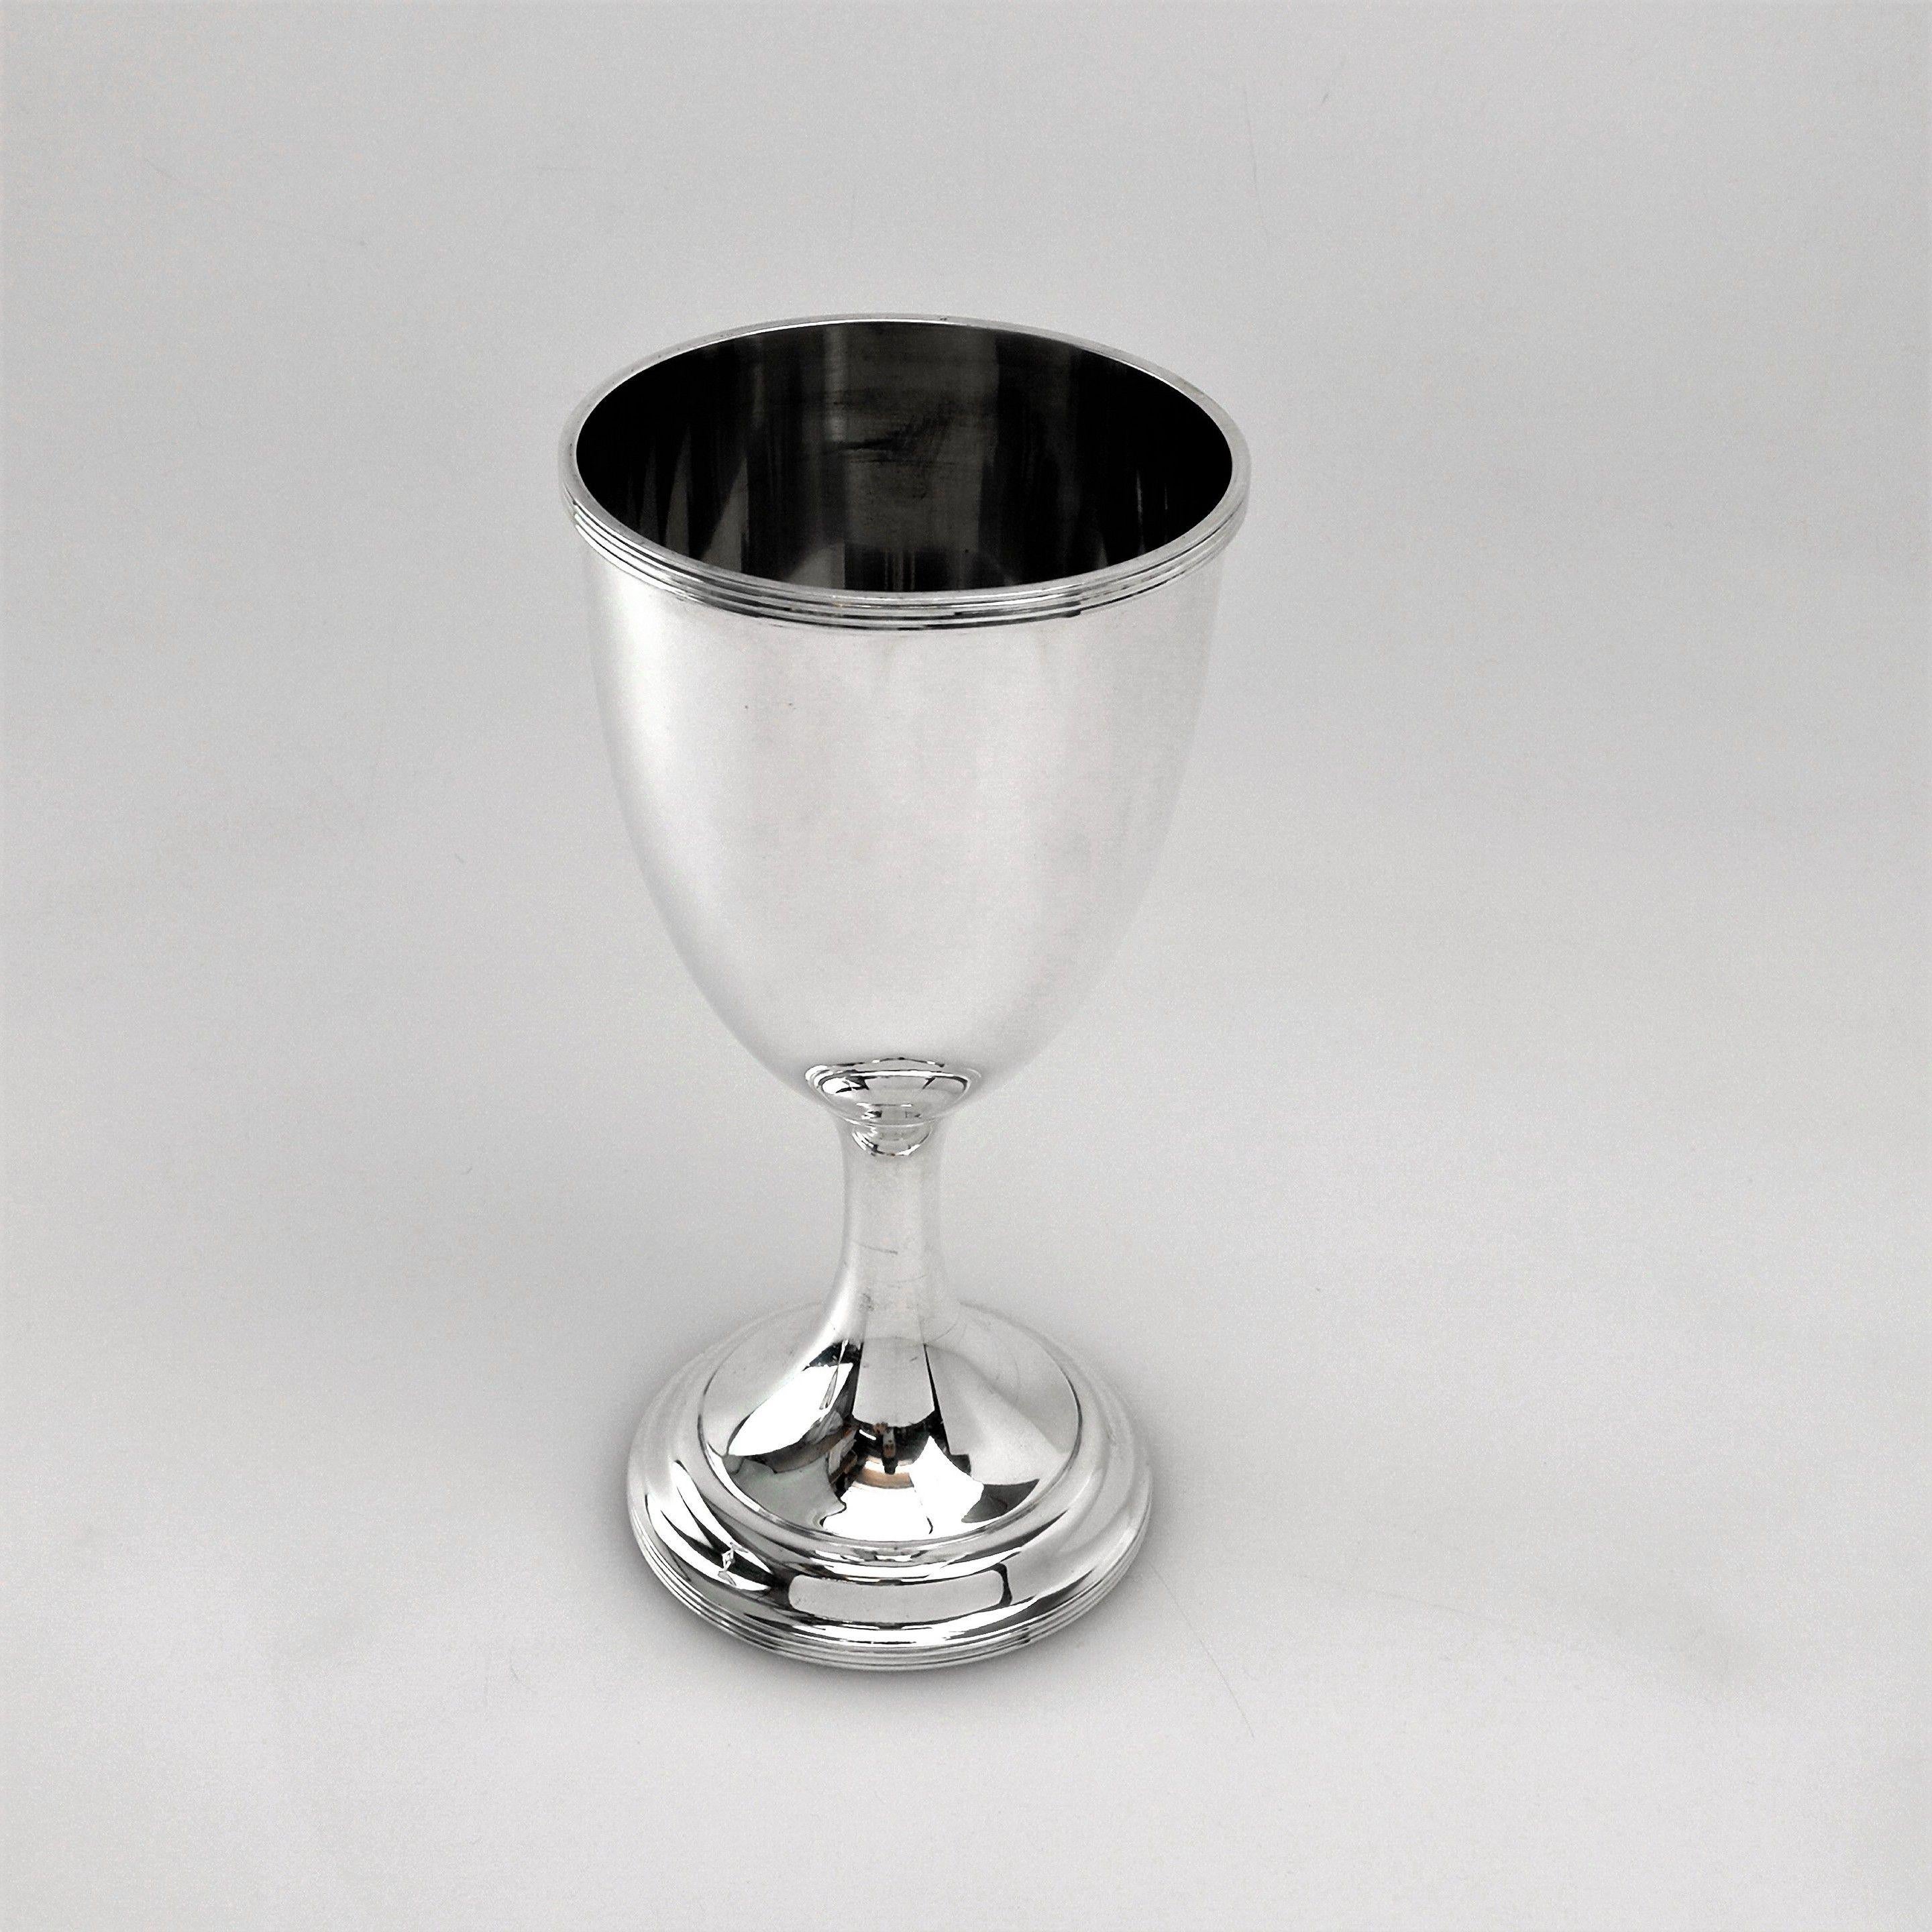 American Set of 12 Antique Sterling Silver Goblets / Wine Glasses, U.S.A, circa 1900